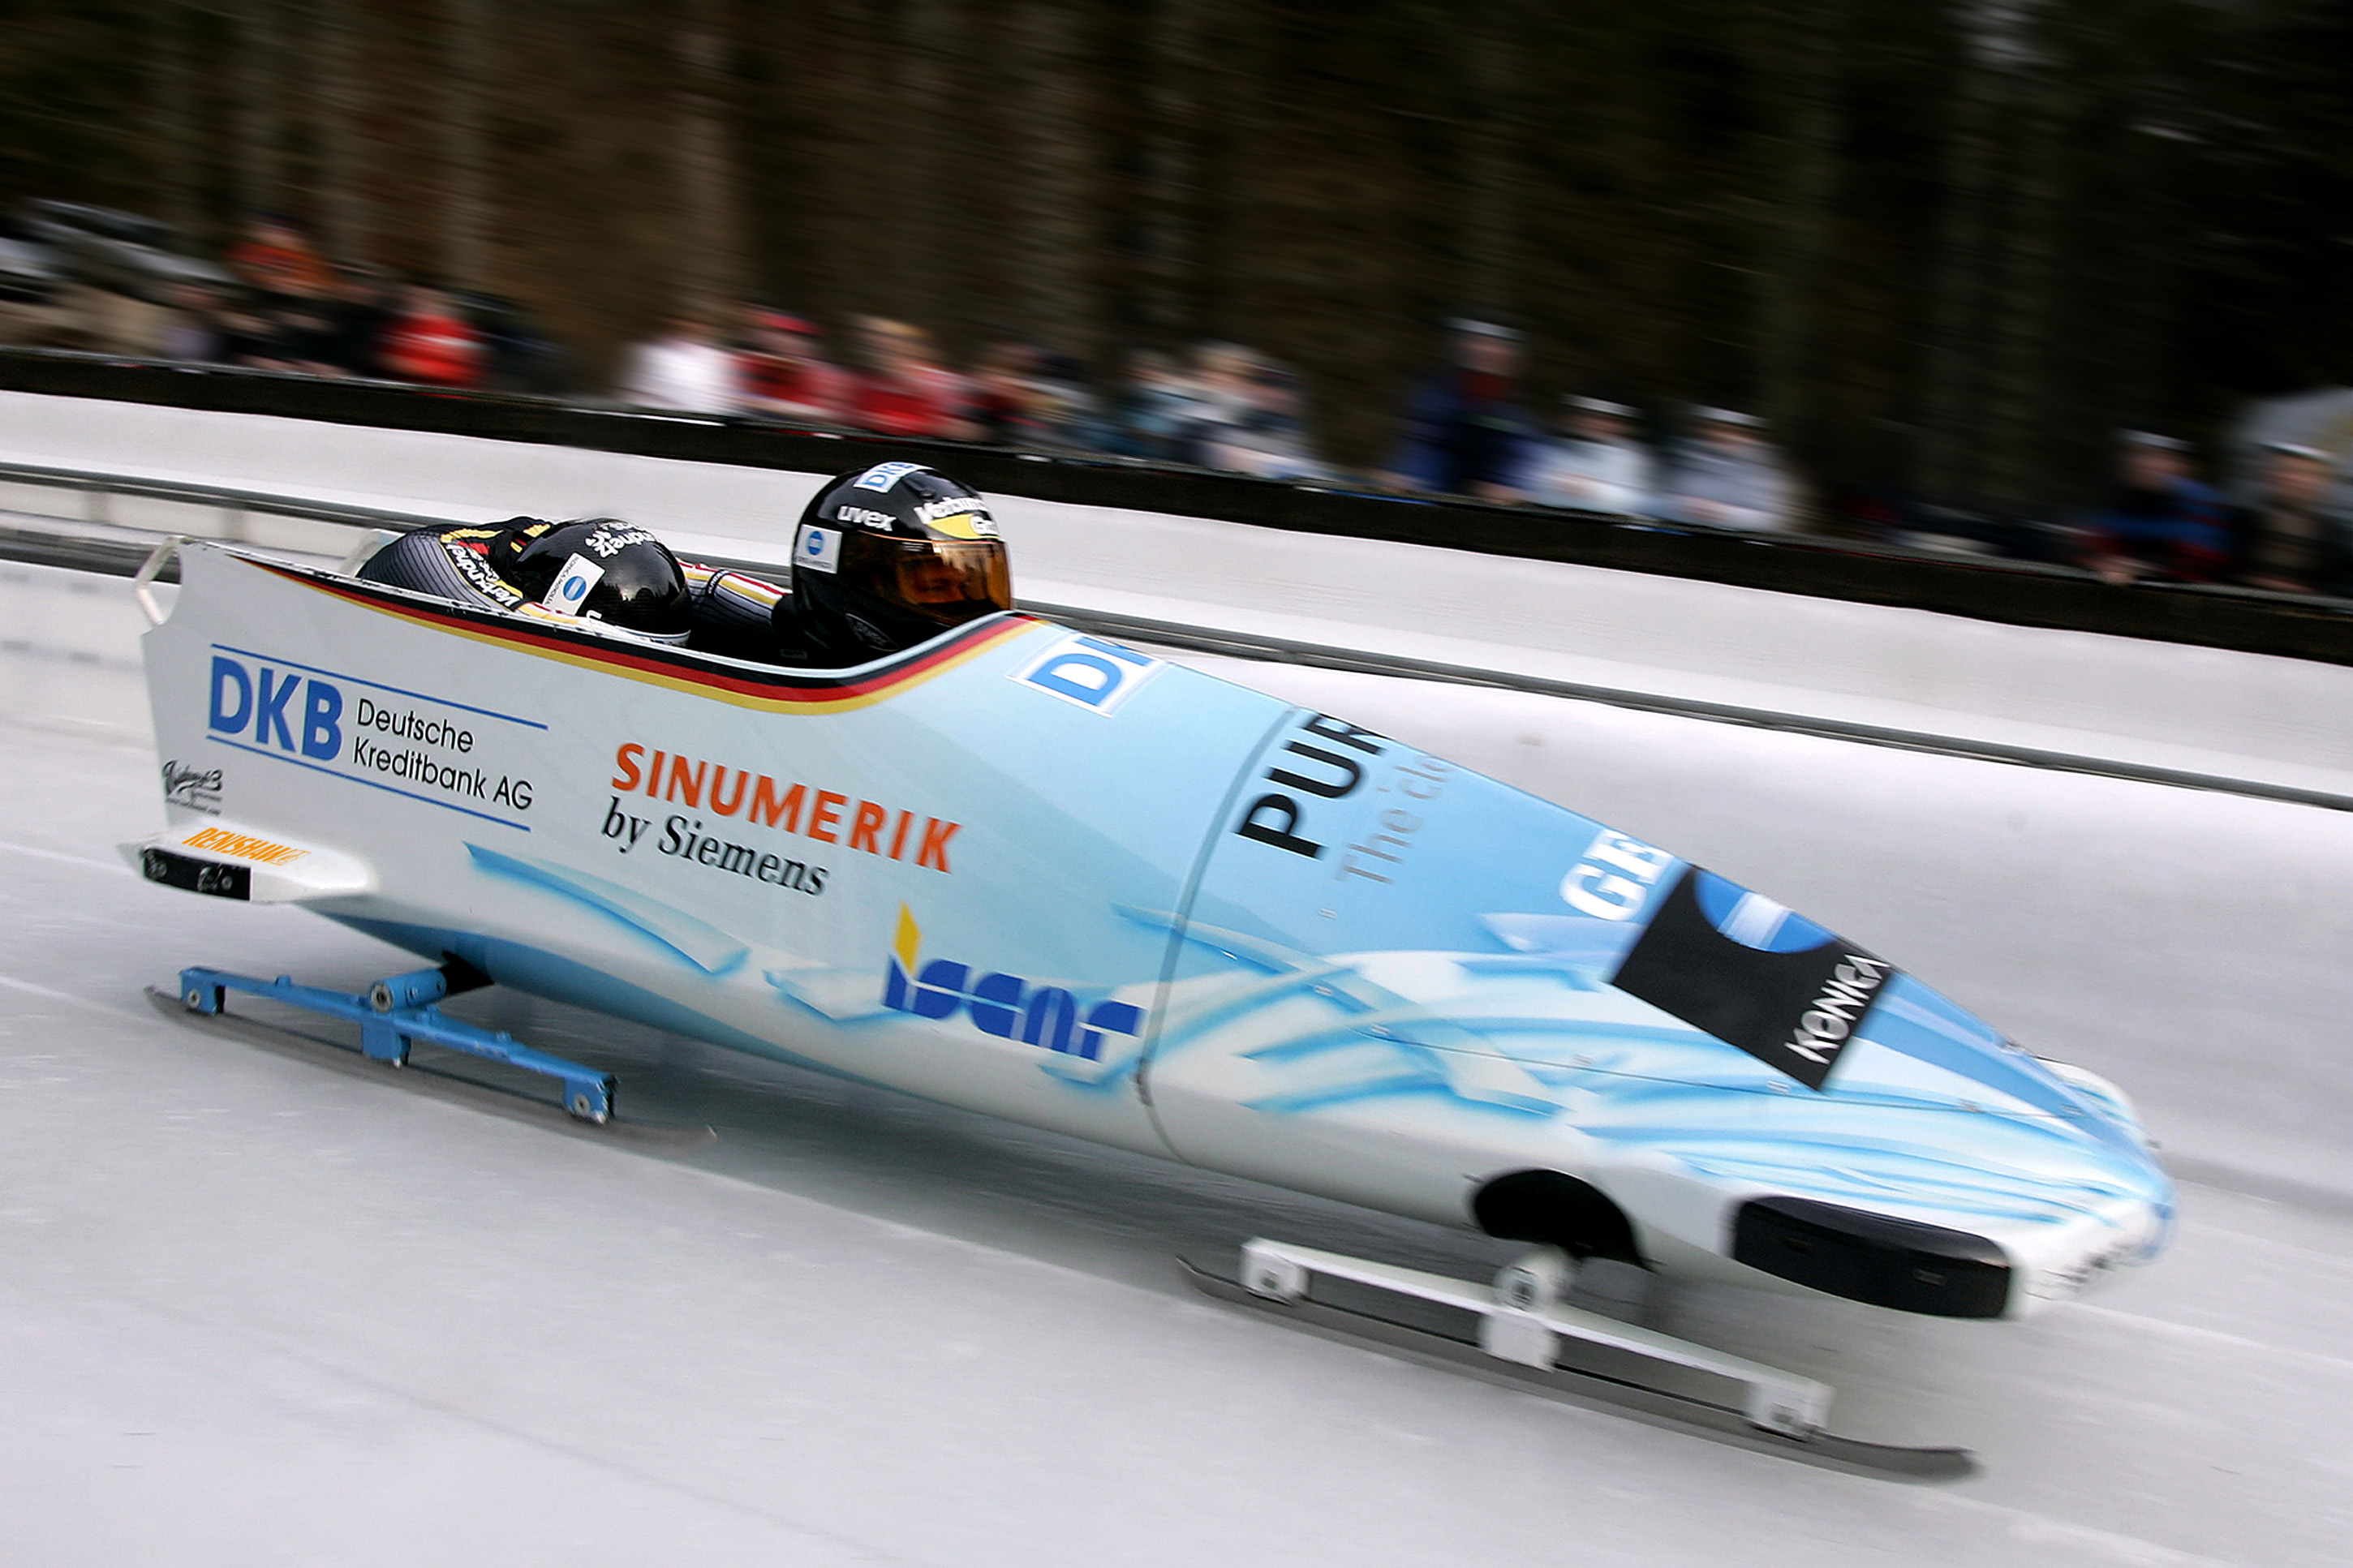 Bobsleigh Backgrounds, Compatible - PC, Mobile, Gadgets| 2900x1933 px